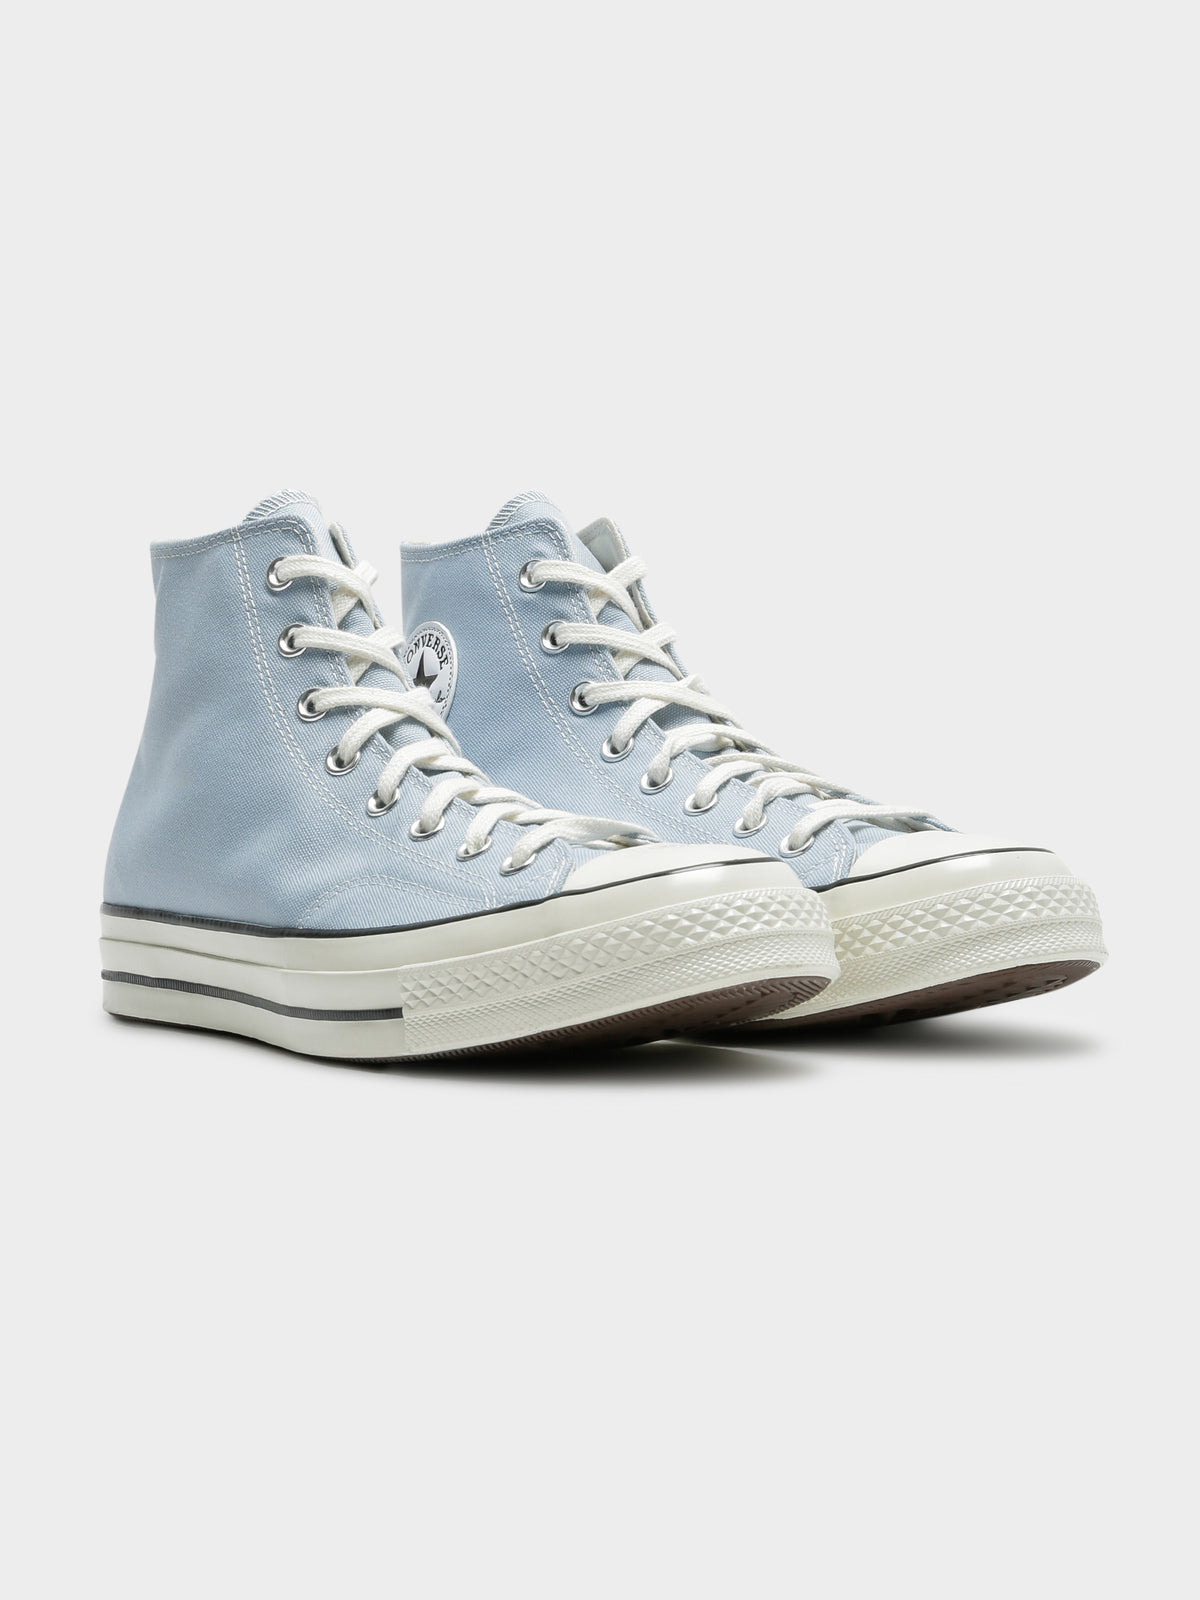 Unisex Chuck Taylor 70 High Sneakers in Armory Blue